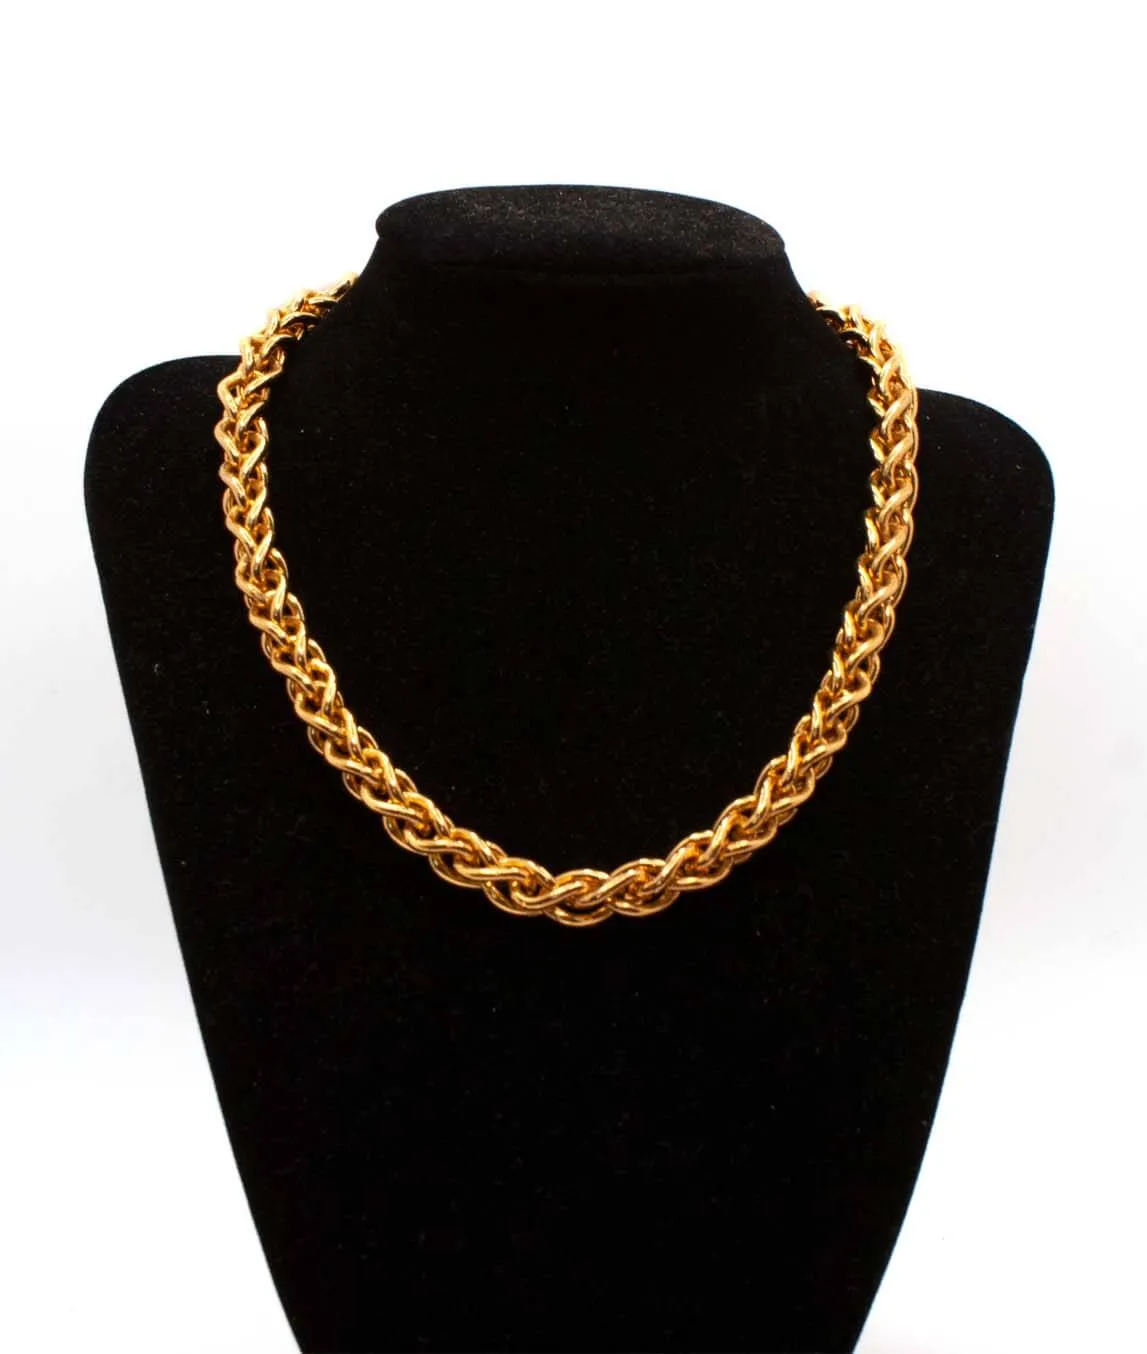 Christian Dior heavy gold plated chain link necklace